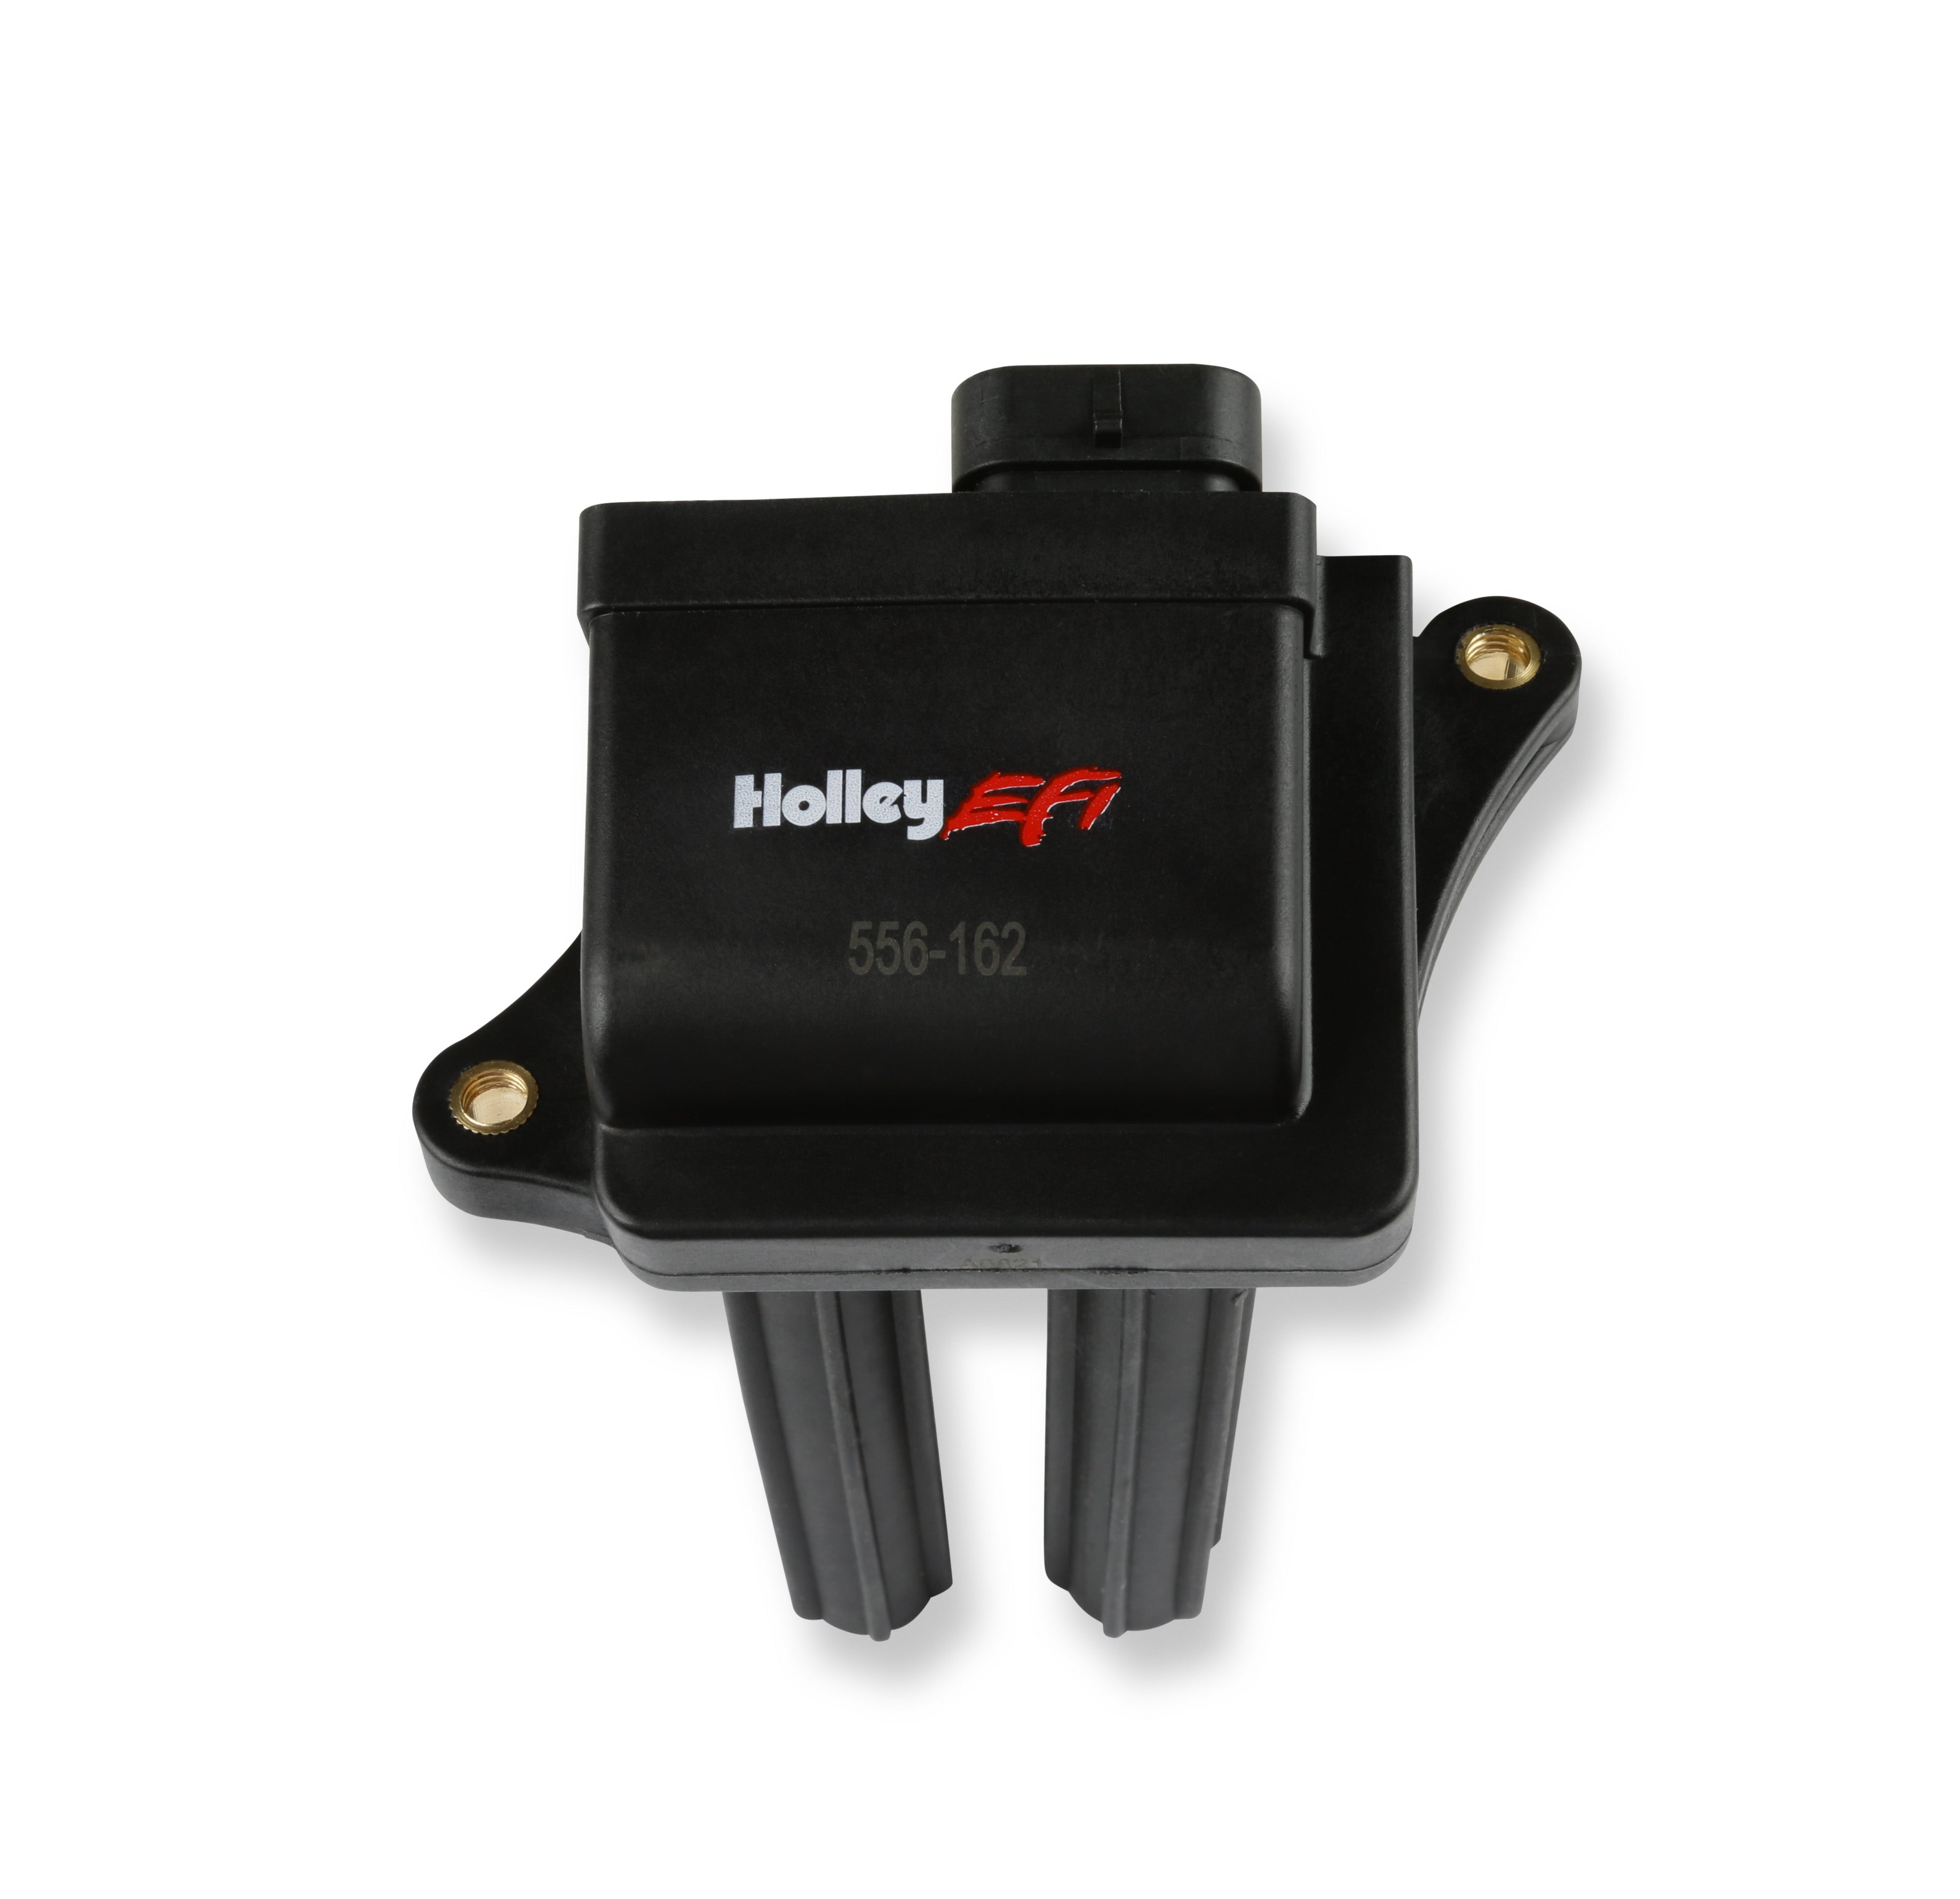 Holley EFI Ignition Coil 556-163